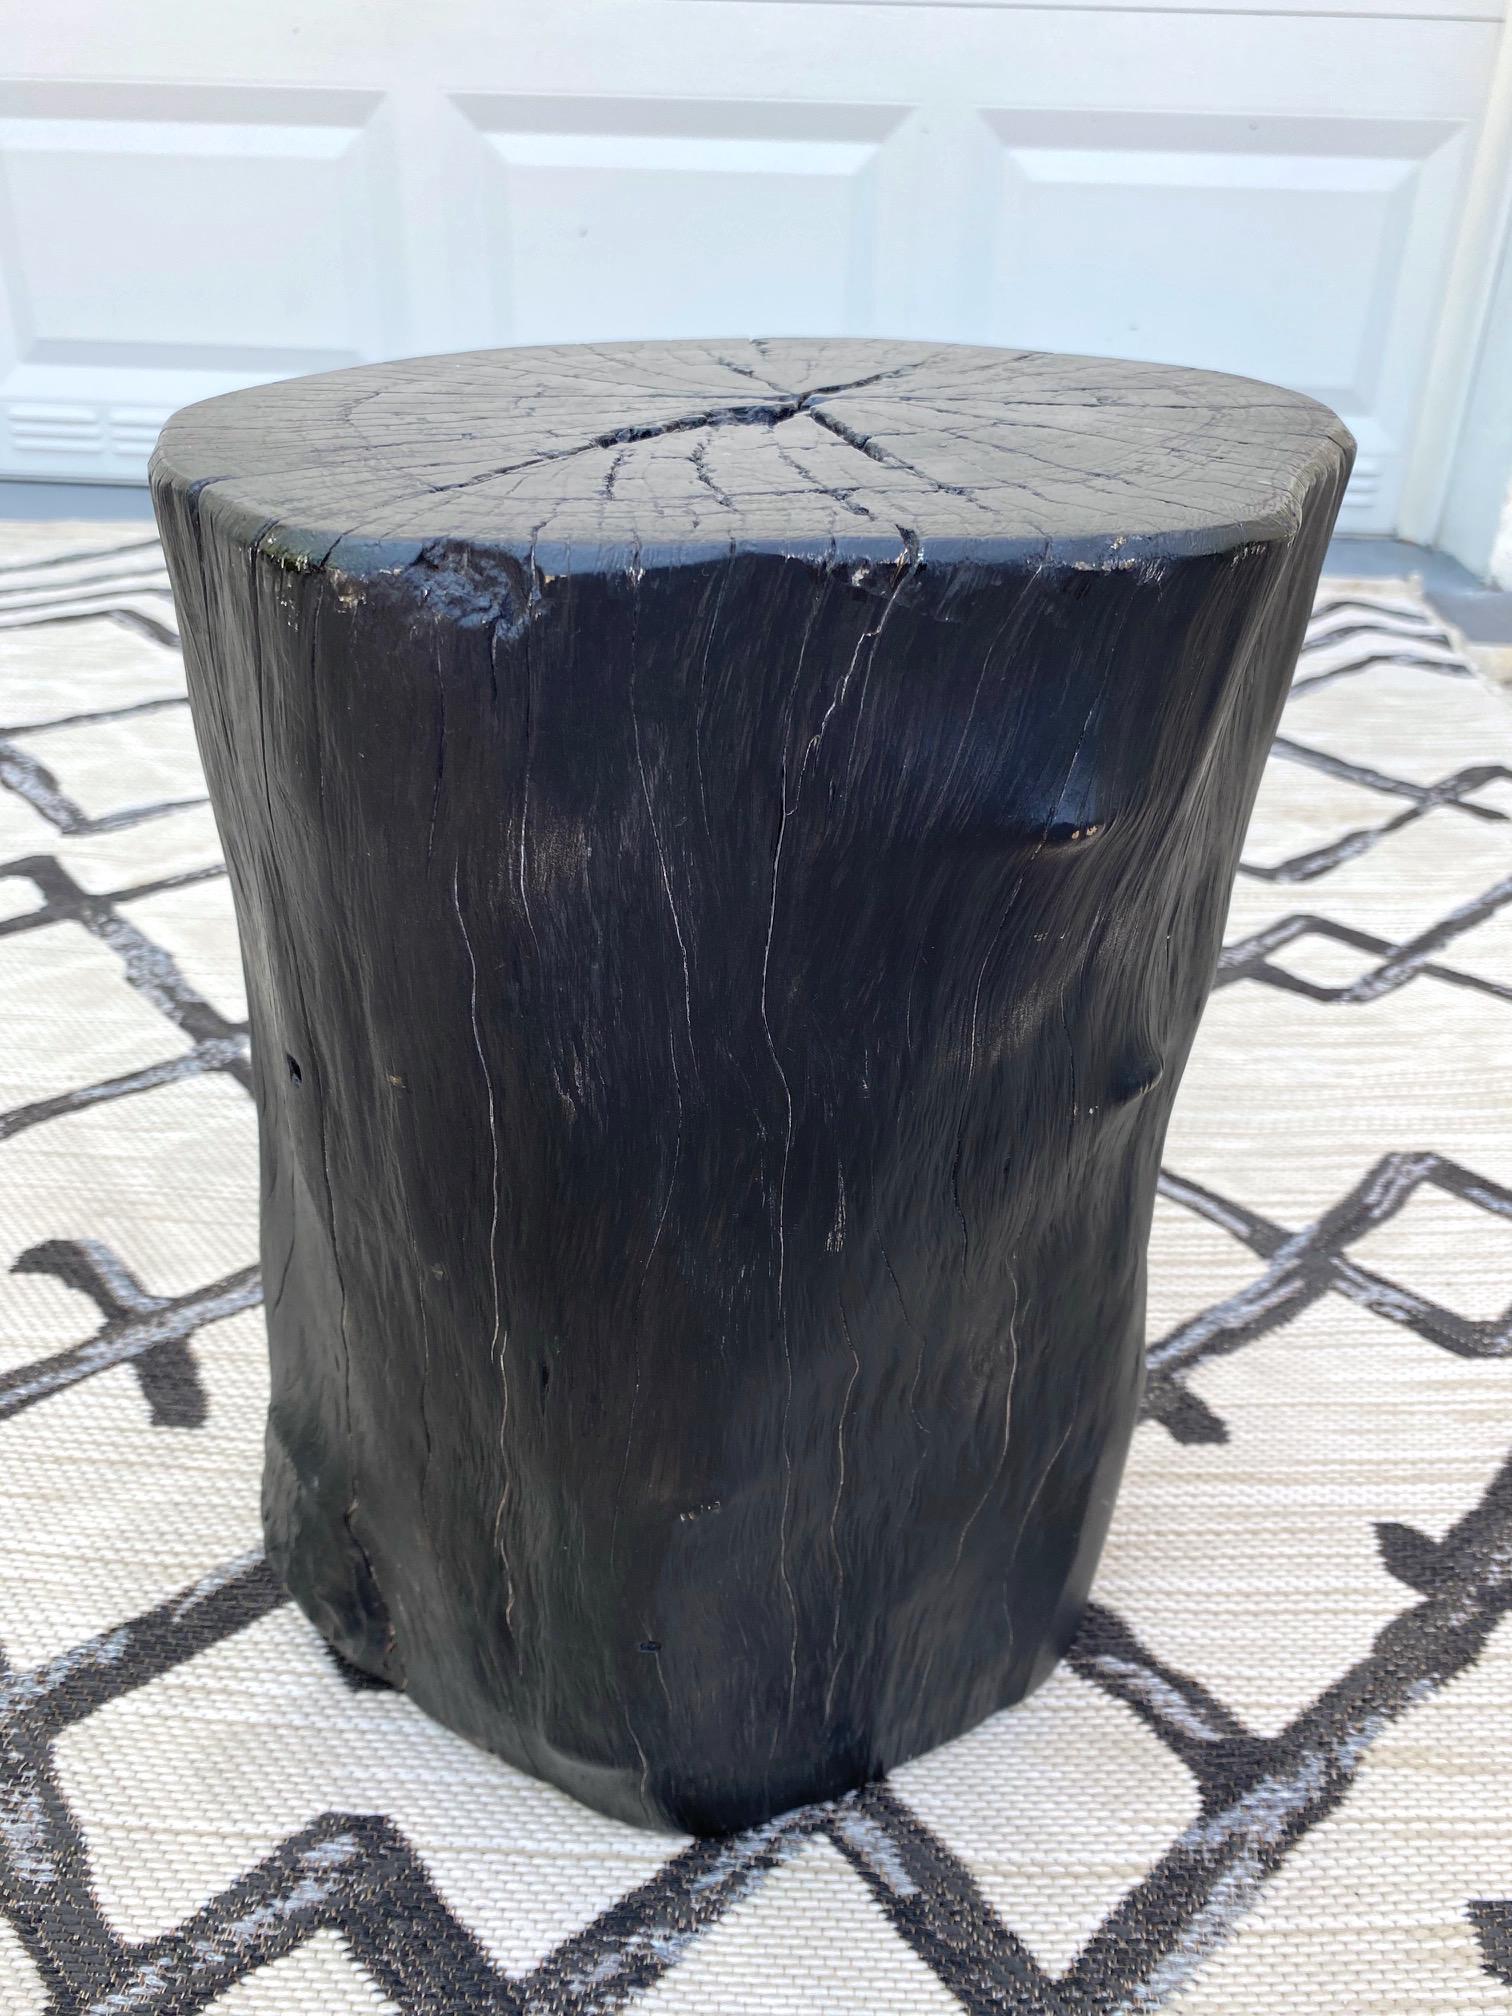 Indonesian burnt and blackened teak wood stump with organic modern design. Makes a gorgeous accent piece for a bathroom or can be used as a drink table or side table. Excellent condition with minor natural variations of lighter wood tones